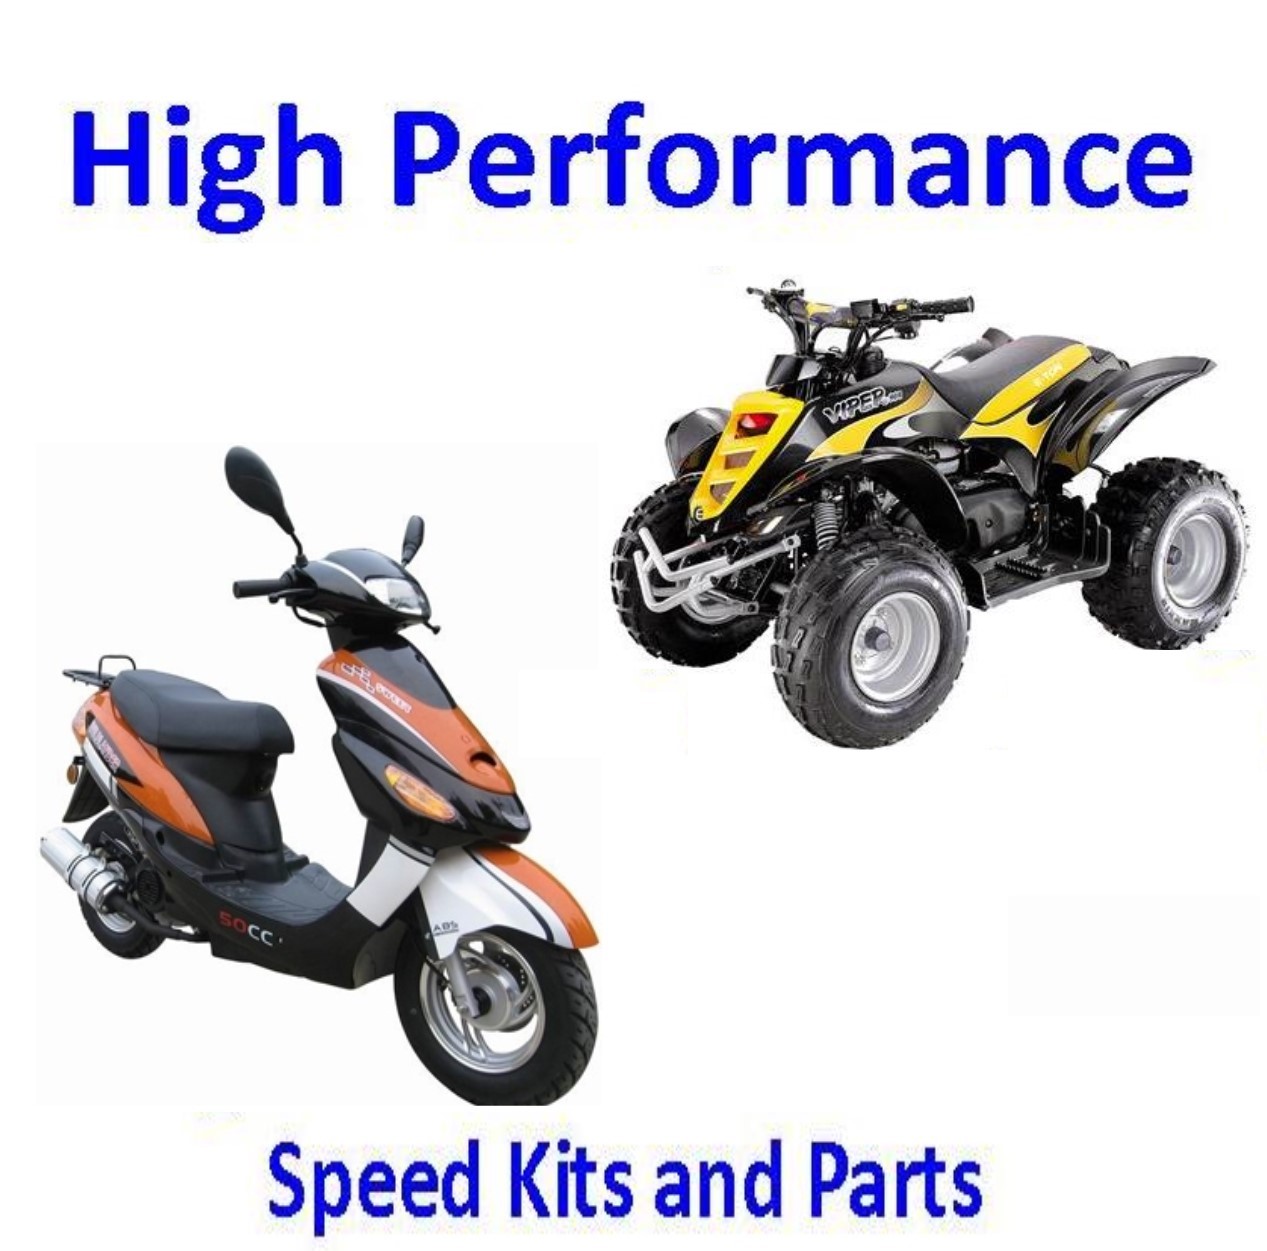 High Performance Parts Scooters-ATVs-GoKarts